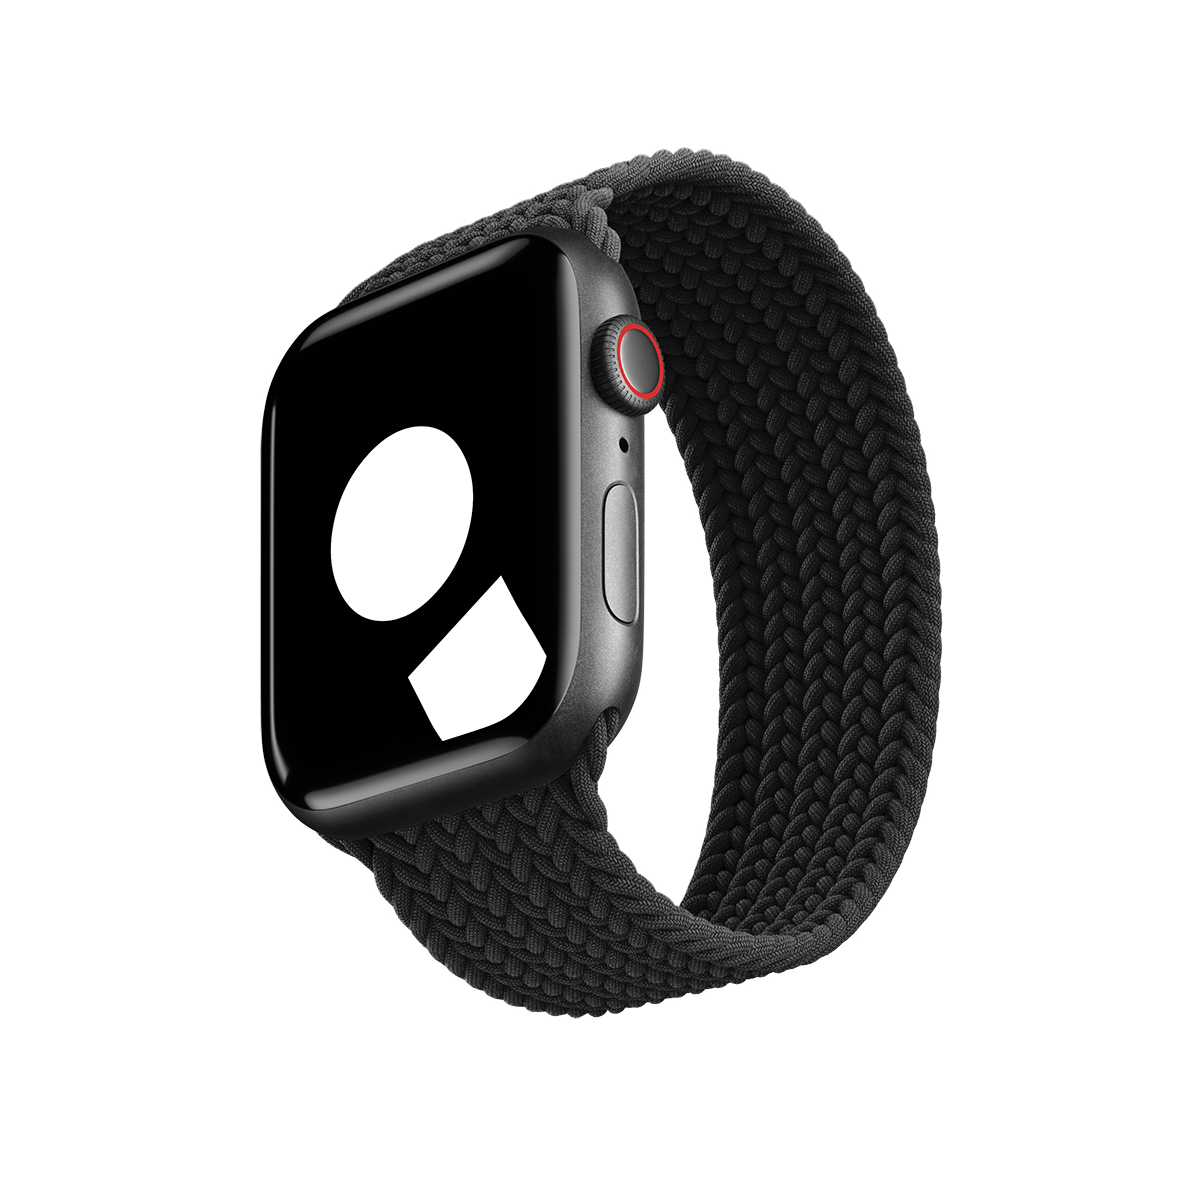 Charcoal Braided Solo Loop for Apple Watch